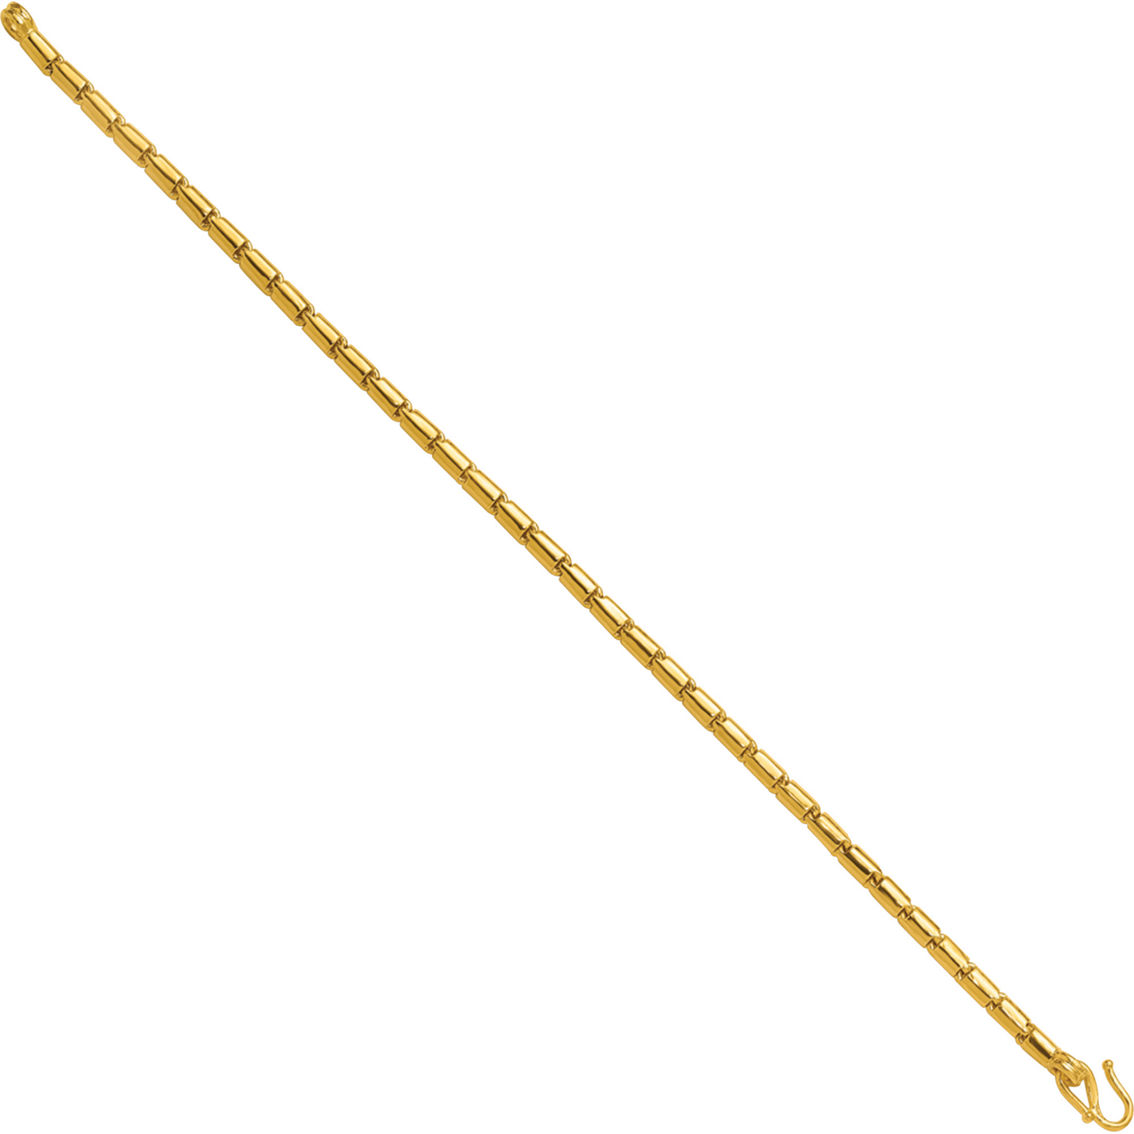 24K Pure Gold 3.2mm Solid Medium Round Barrel Link Chain 8 in. Bracelet - Image 4 of 5